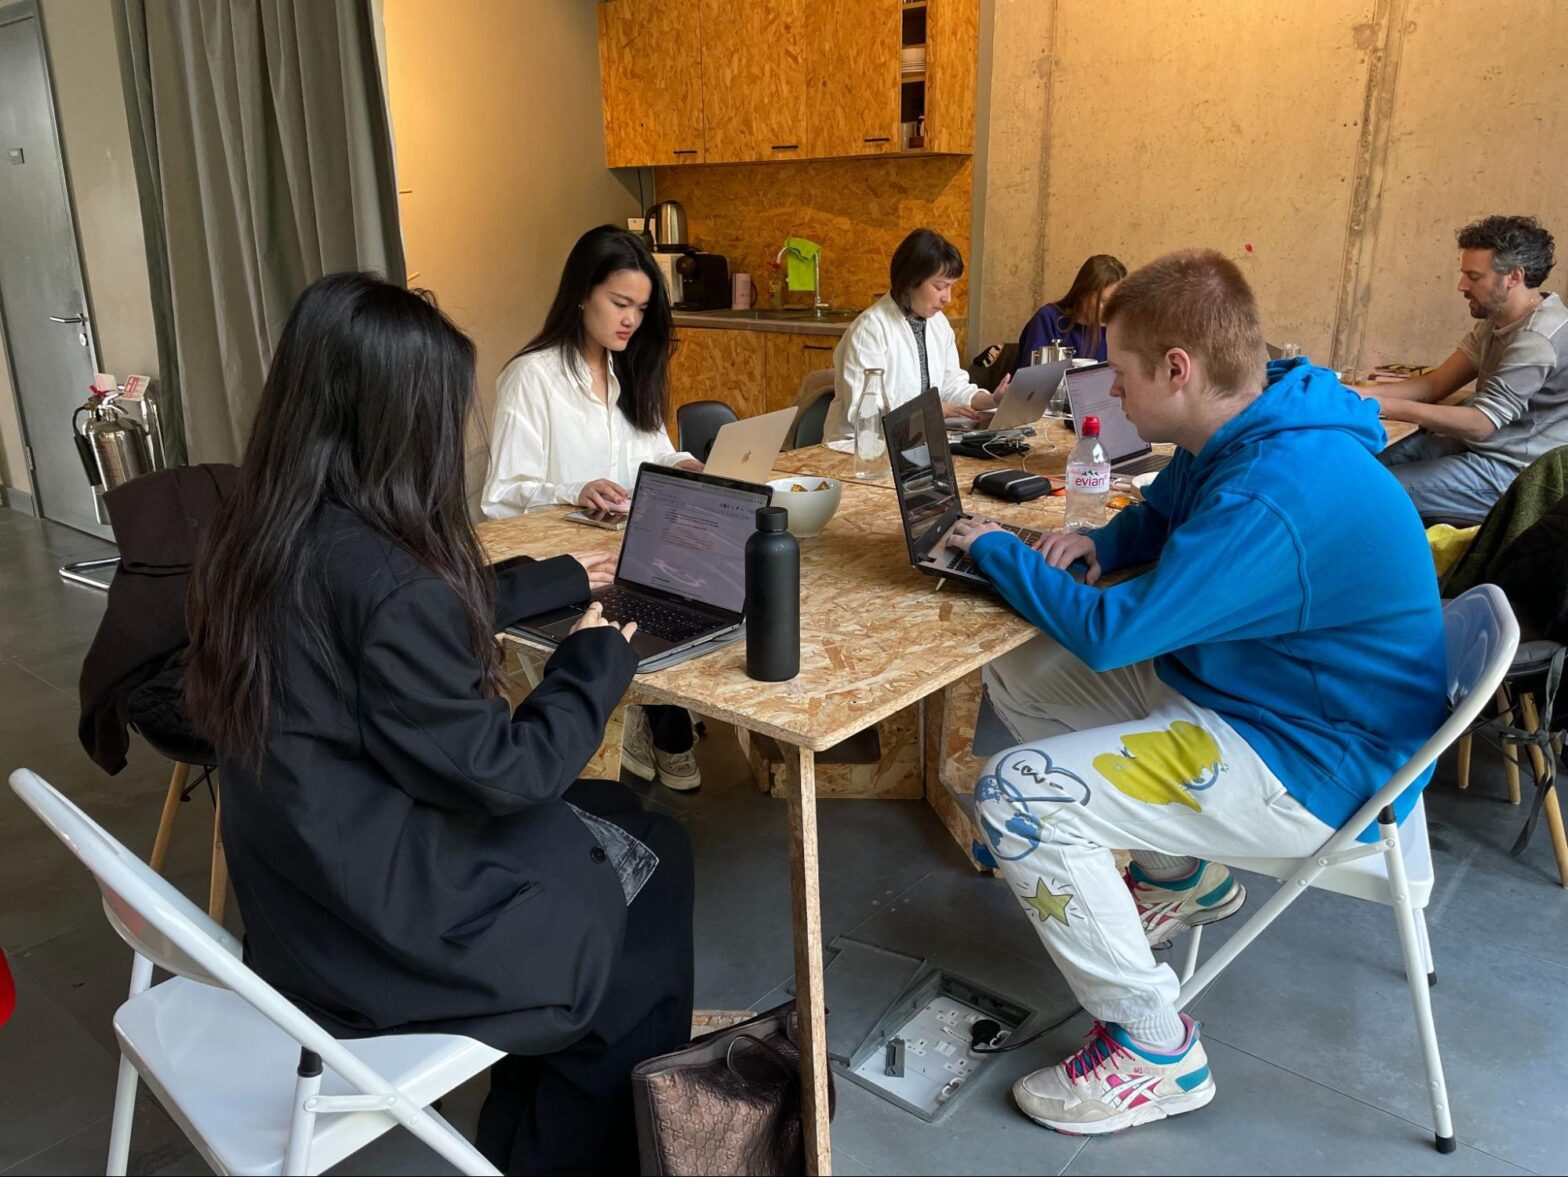 A group of students working together at a communal desk